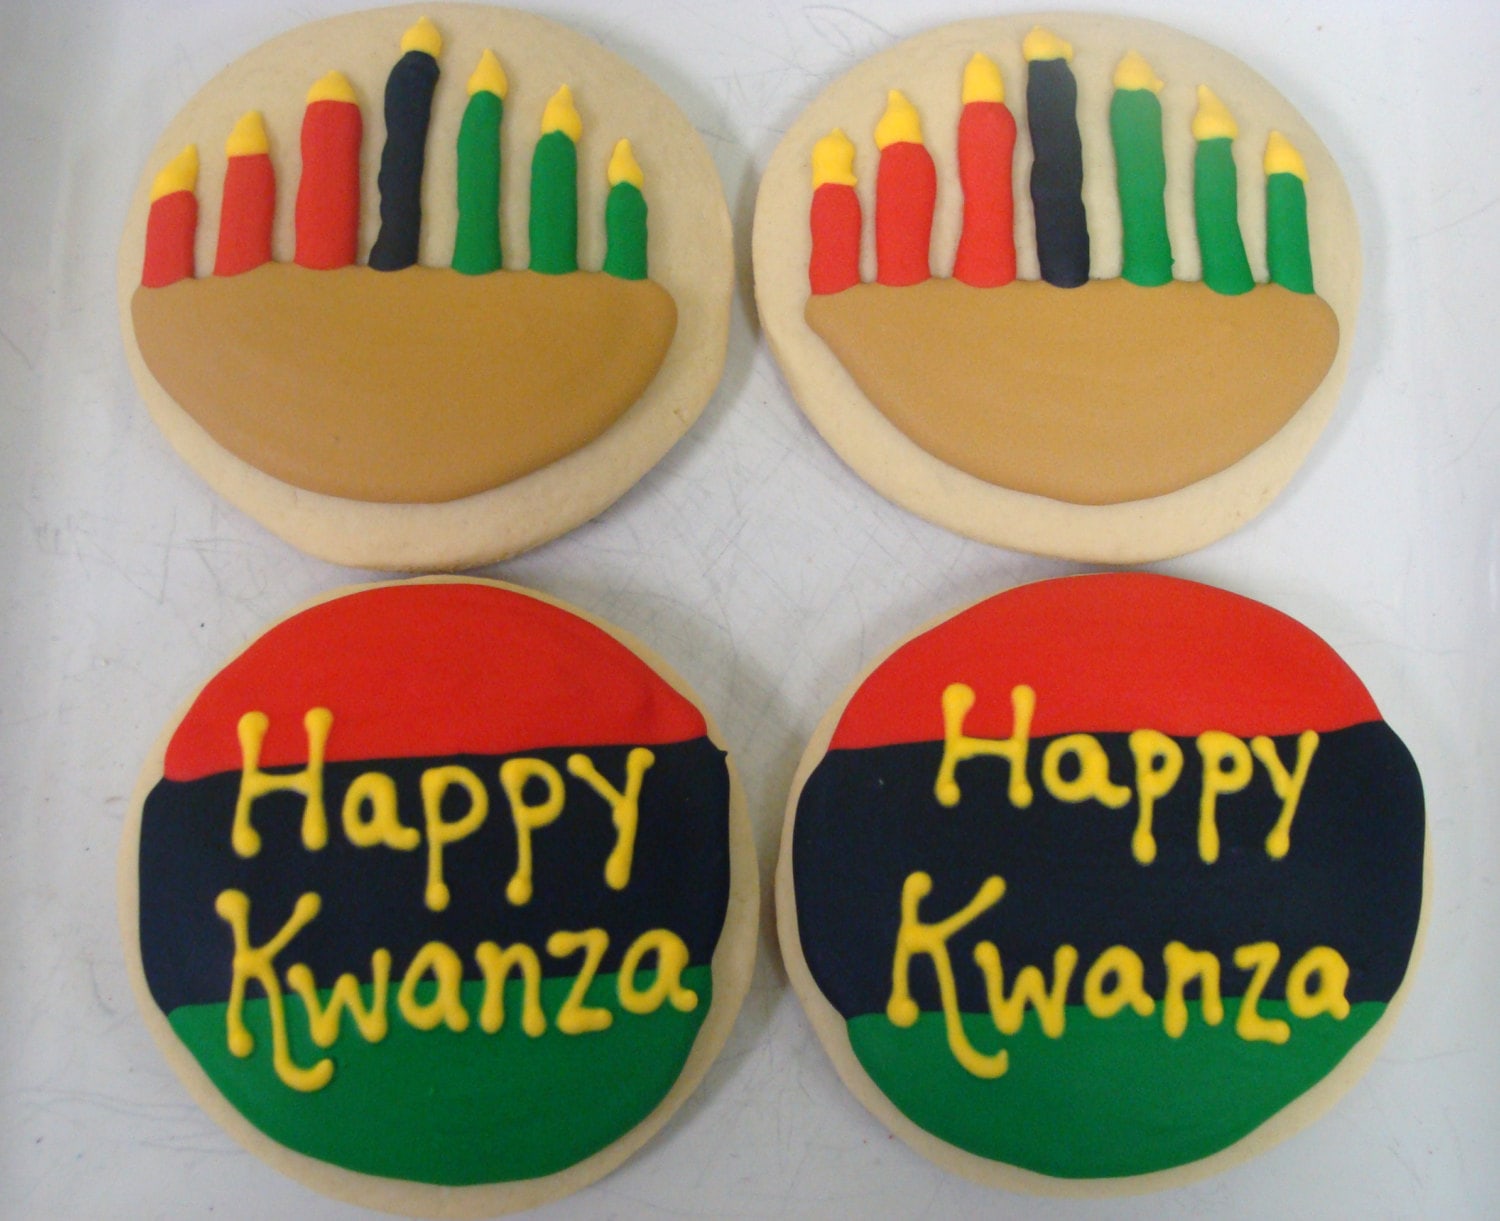 A Kwanzaa Feast Can Include Anything Image Courtesy Er Cosmiccookiebakery